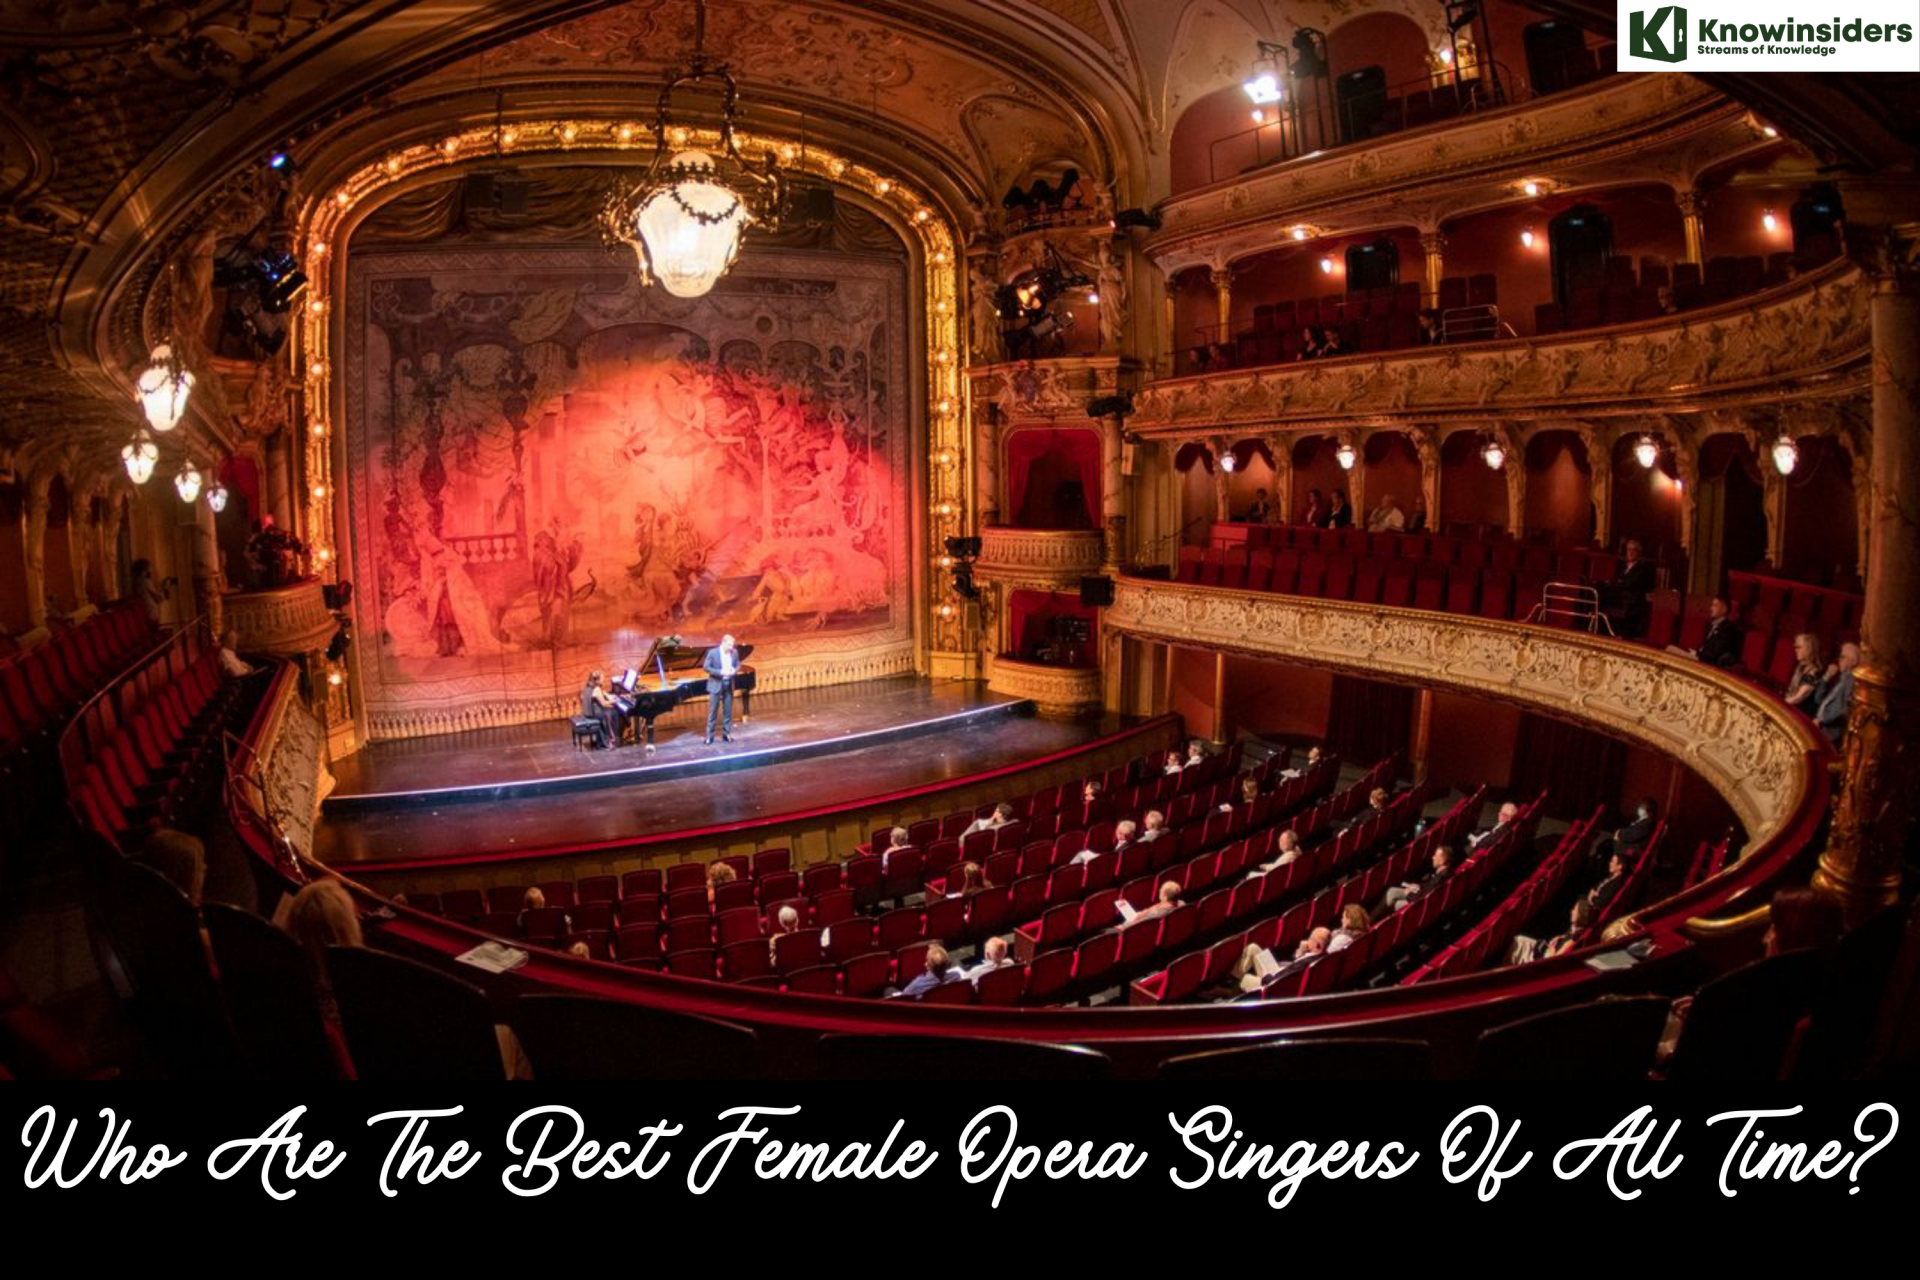 Who Are The Best Female Opera Singers Of All Time? - Top 10